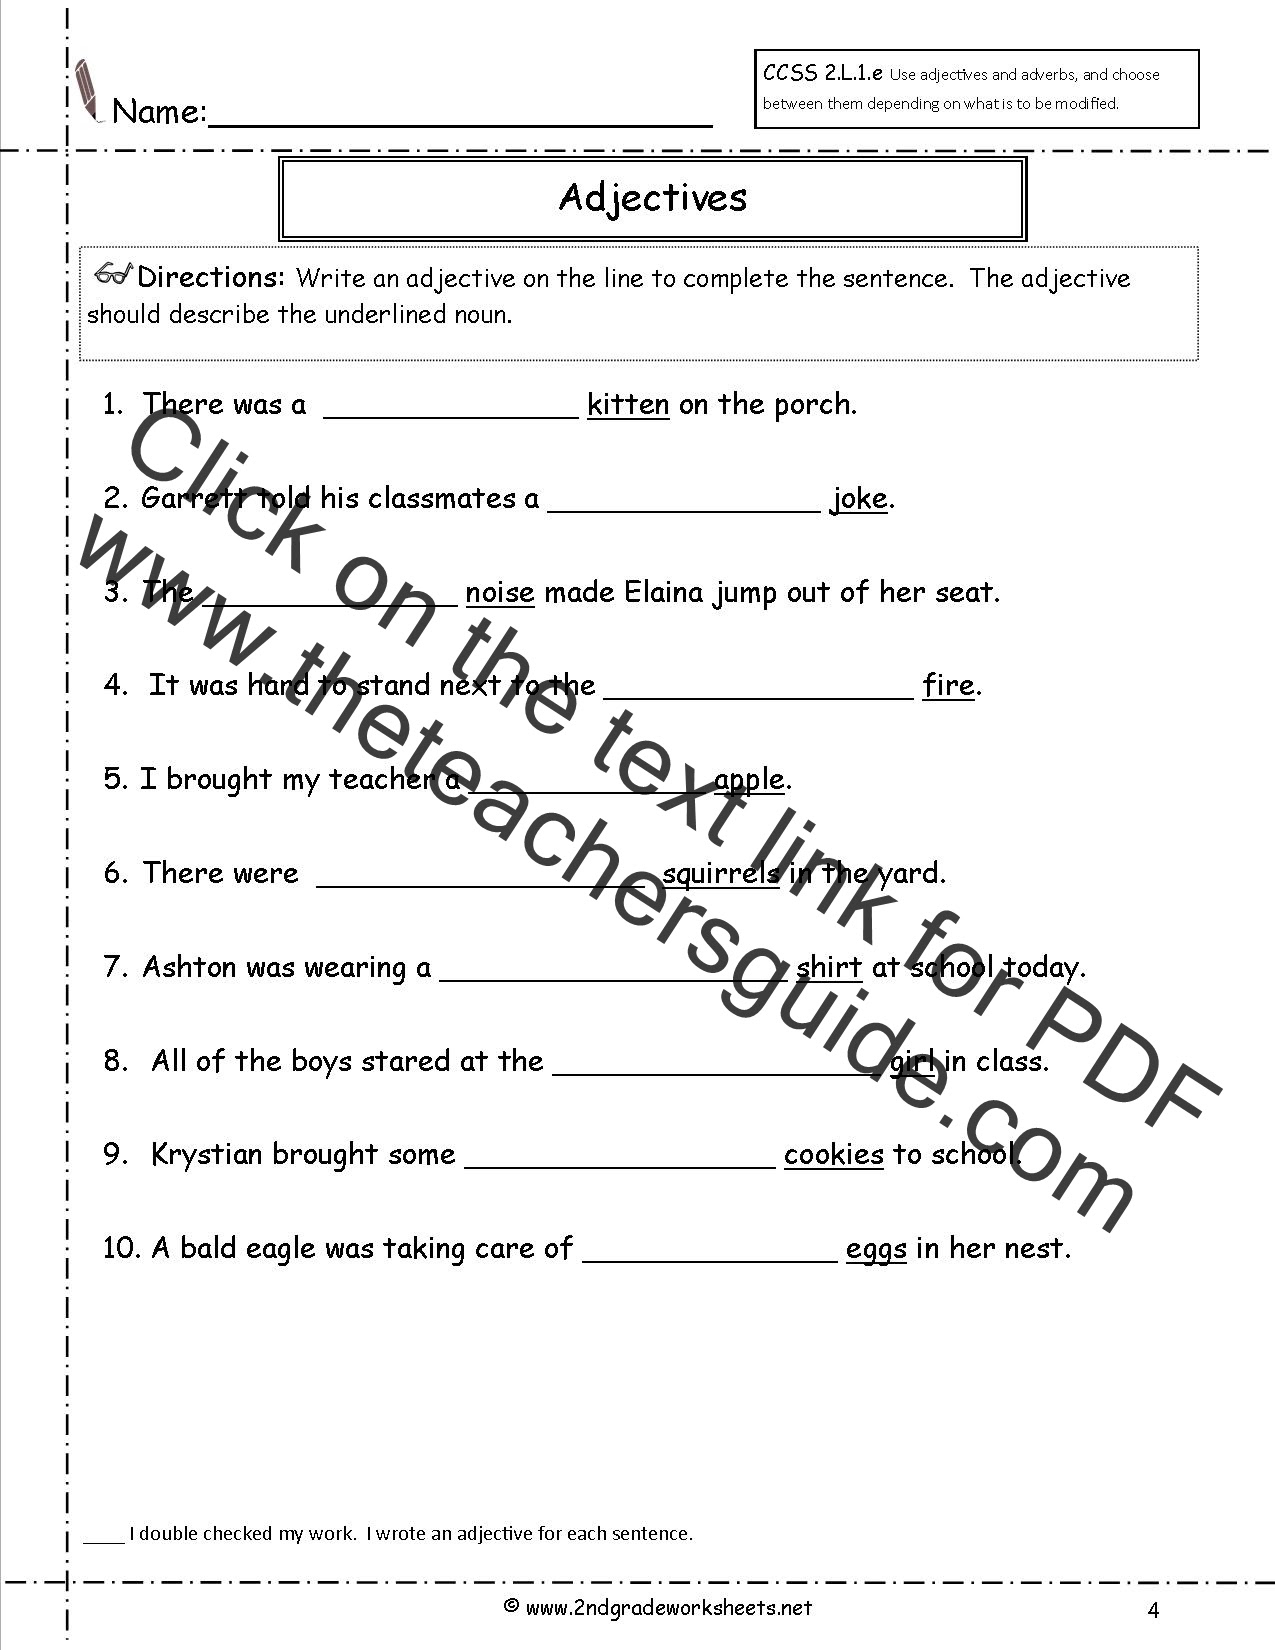 adverbs-and-adjectives-worksheet-2-answers